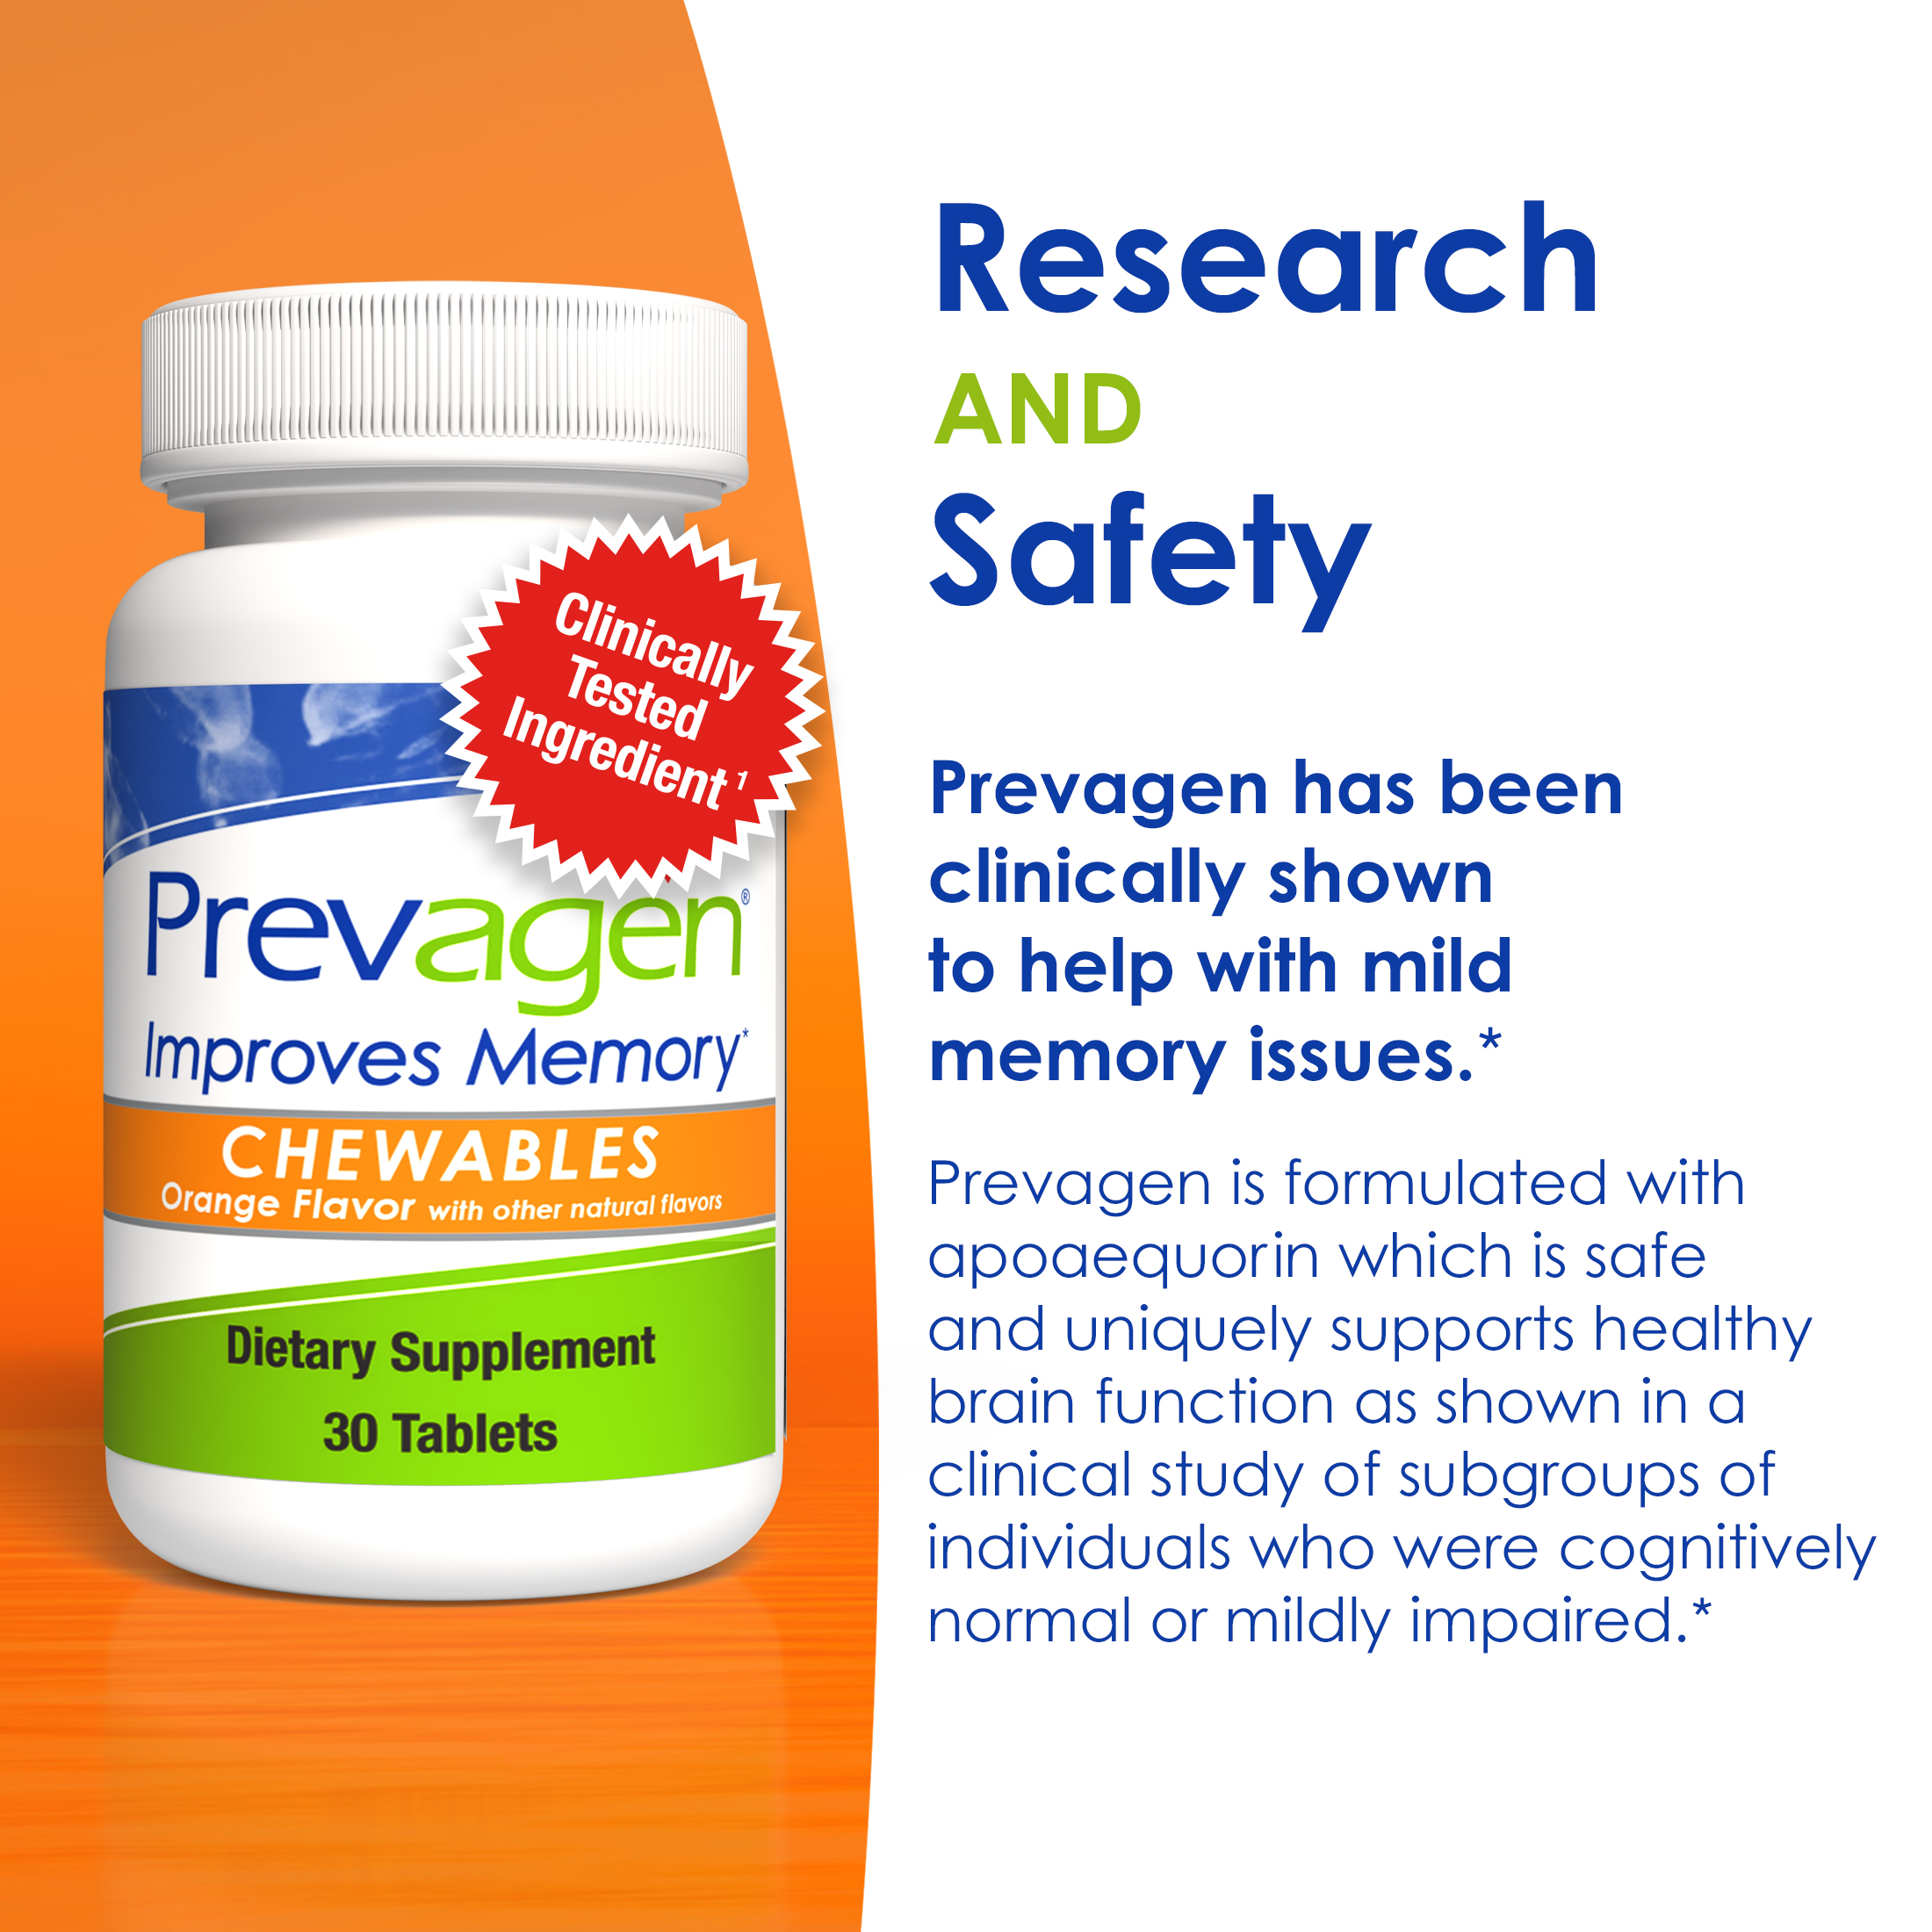 Prevagen Improves Memory - Regular Strength 10mg, 30 Chewable Tablets Orange Flavor with Apoaequorin & Vitamin D Brain Supplement, Supports Healthy Brain Function - image 4 of 9